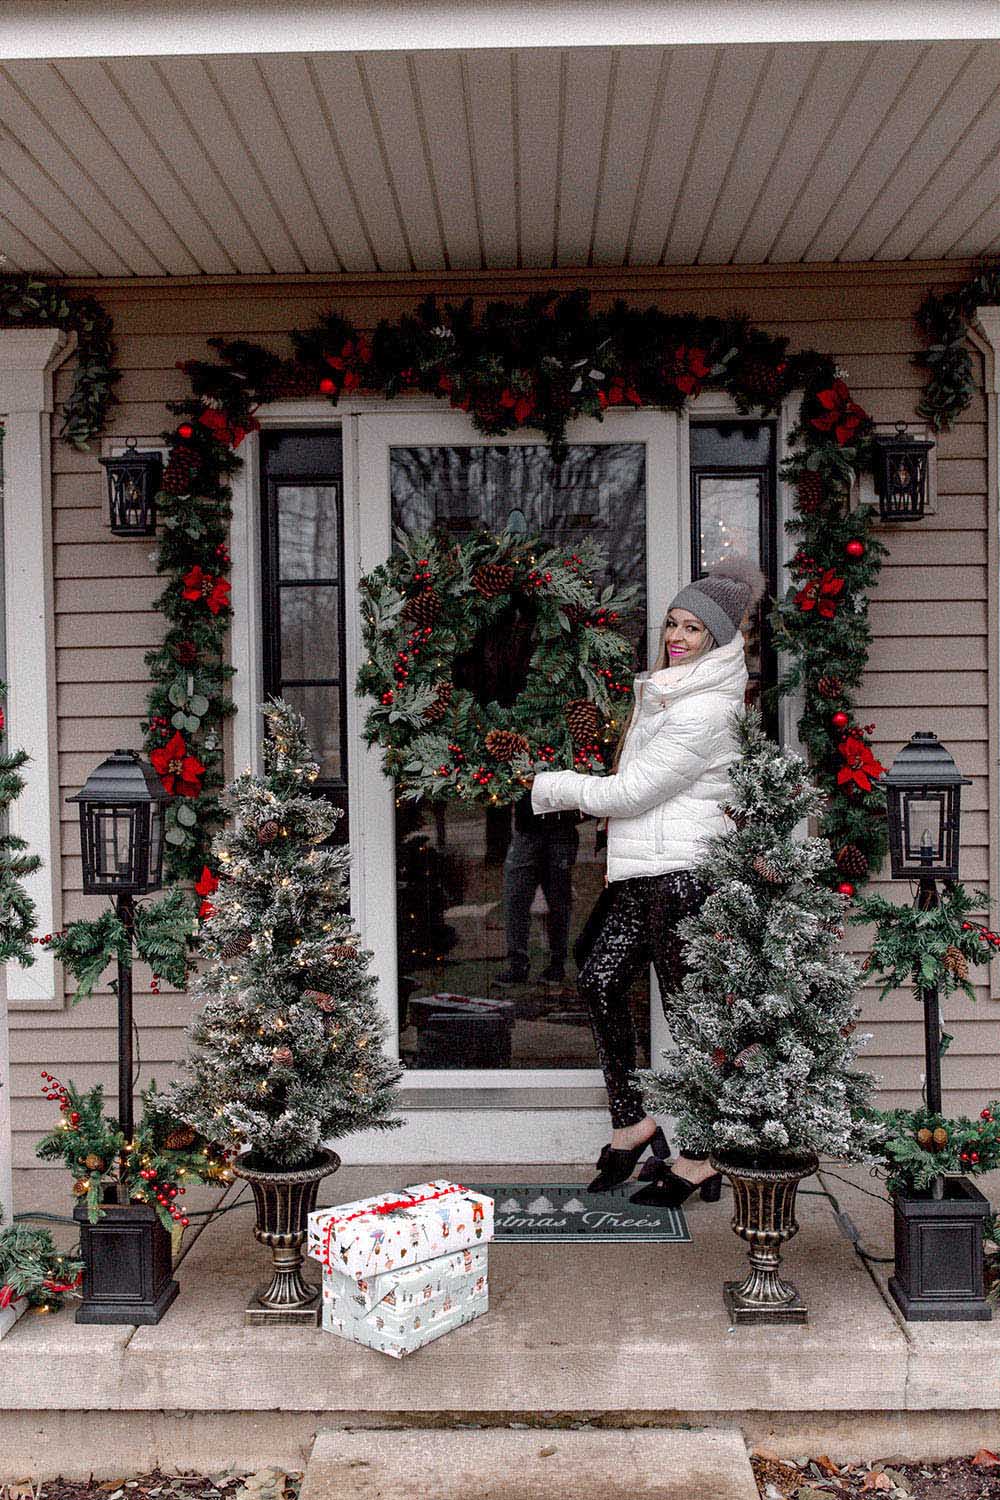 A person standing on front porch with Christmas decorations